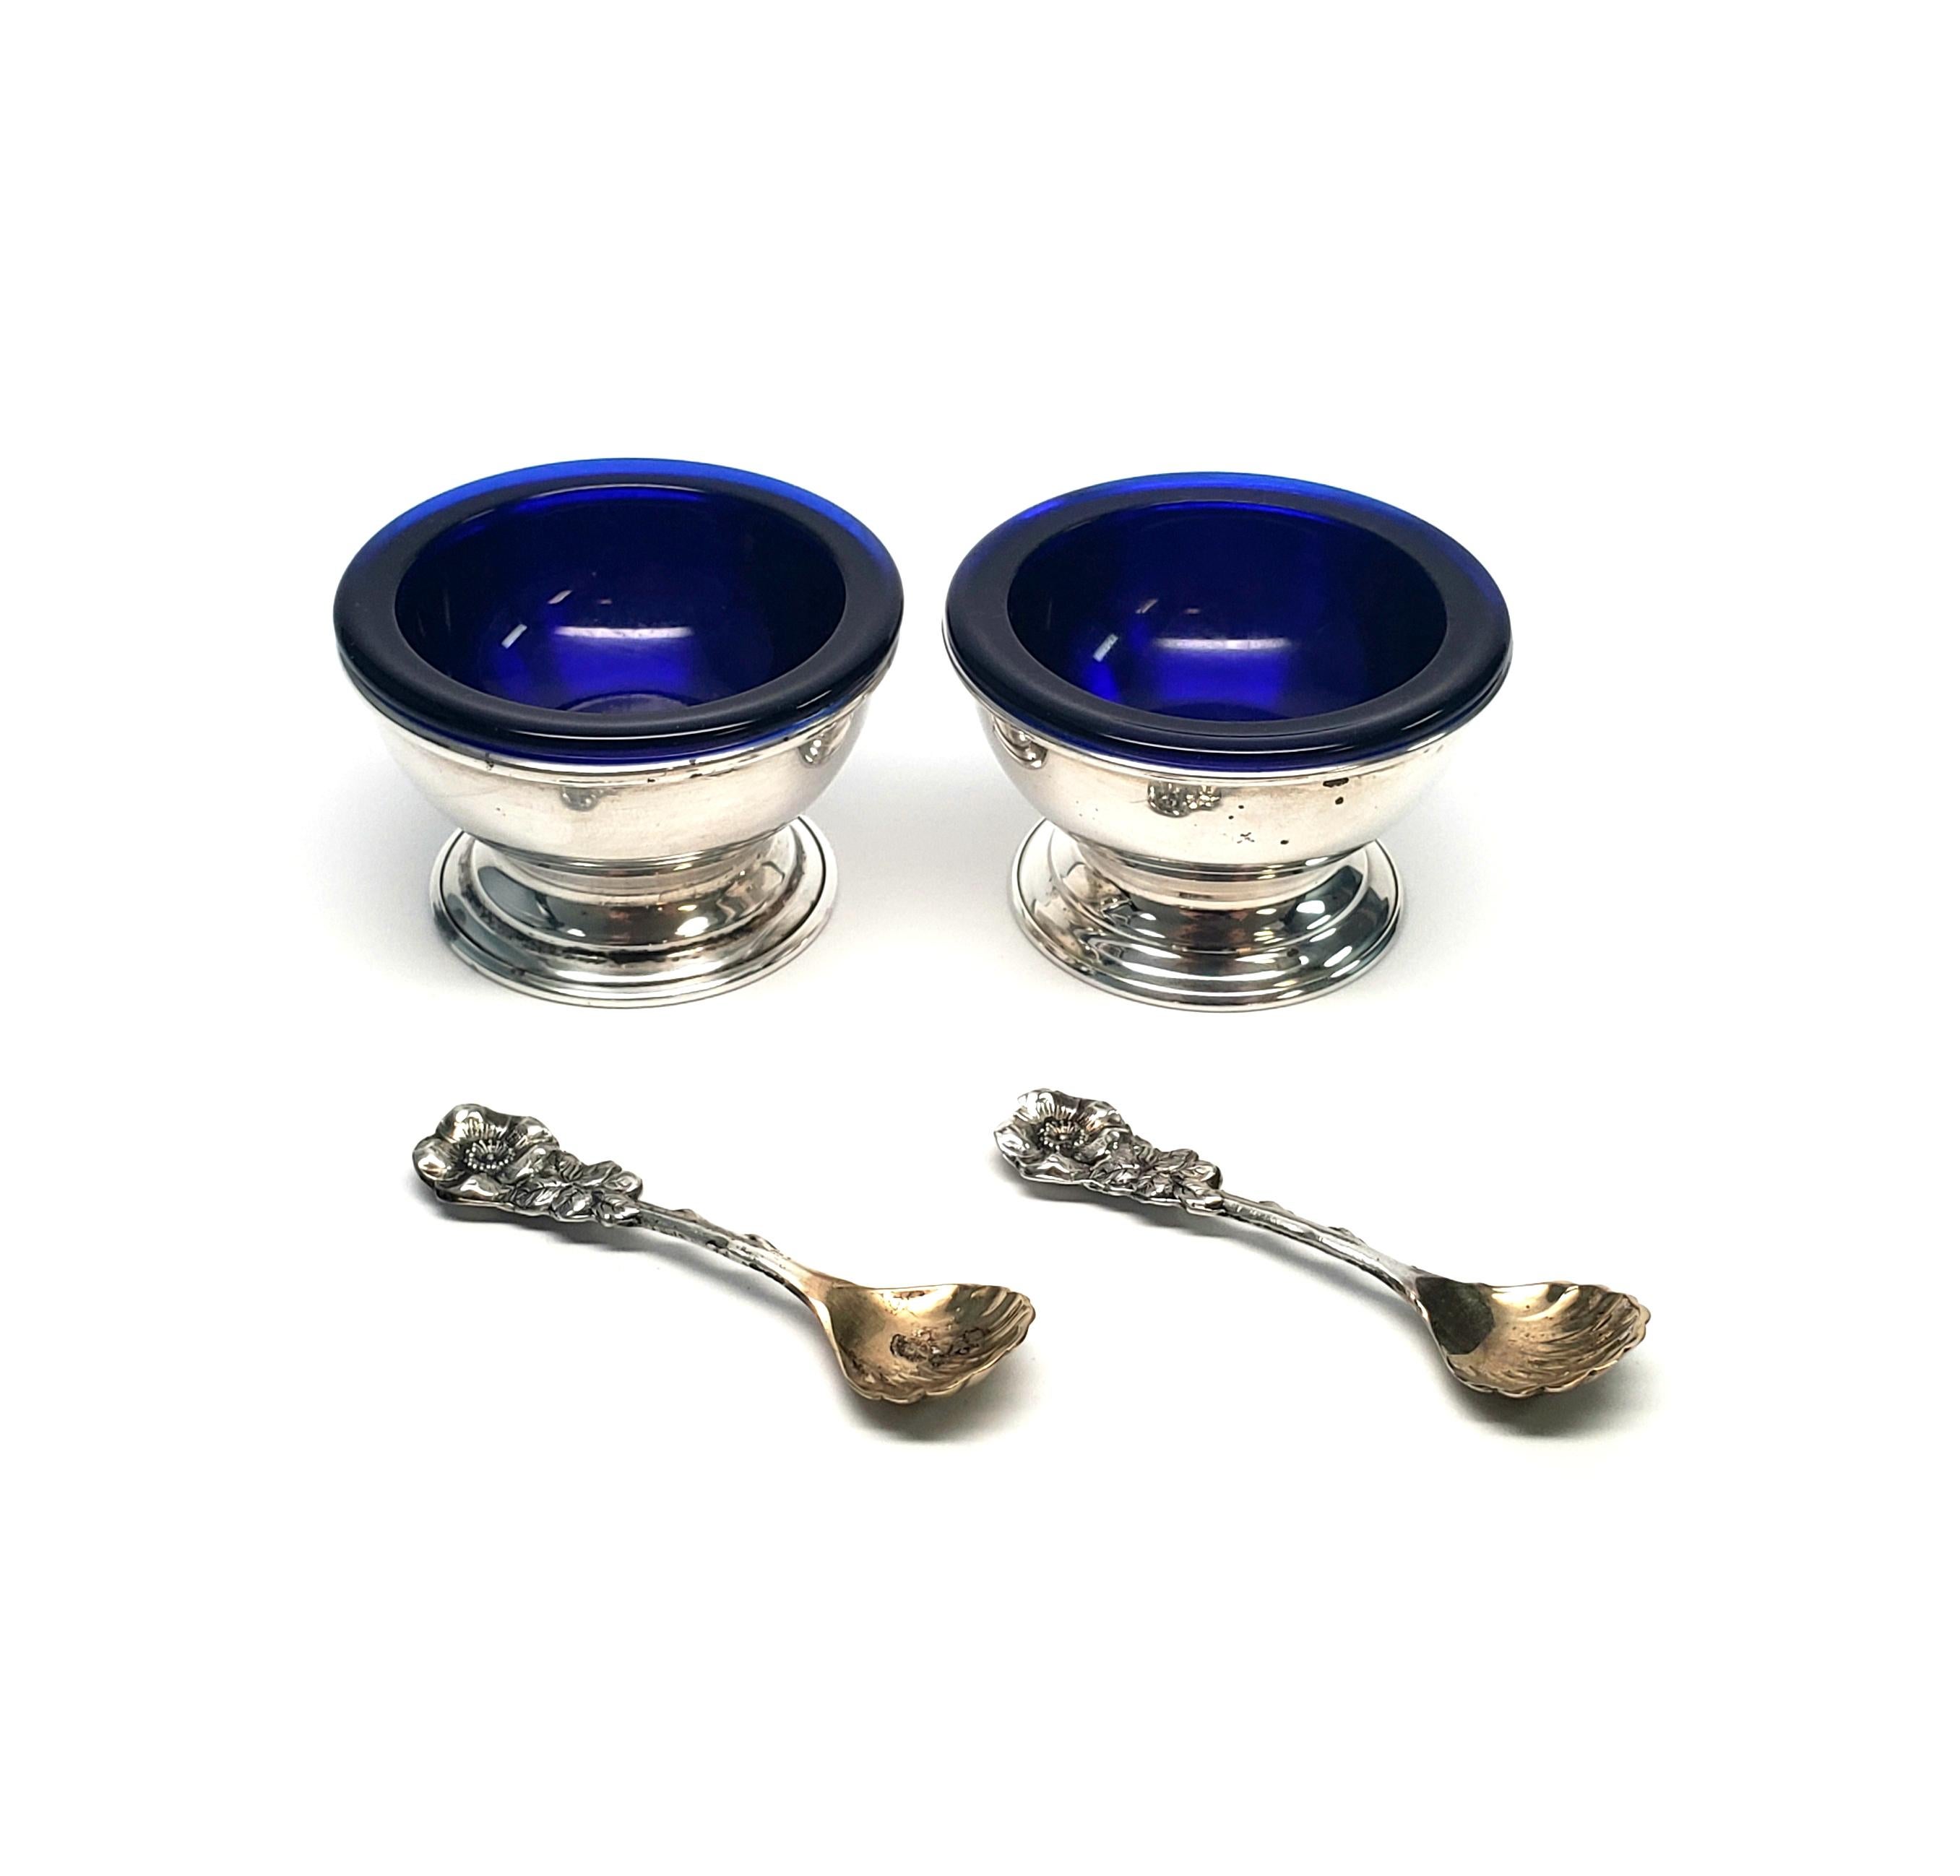 Boxed Set of 2 Reed & Barton salt cellars with 2 spoons.

Salt cellars each feature a removable cobalt blue glass bowl inside a sterling silver pedestal base. Set also includes 2 spoons with gold washed shell bowls and floral design